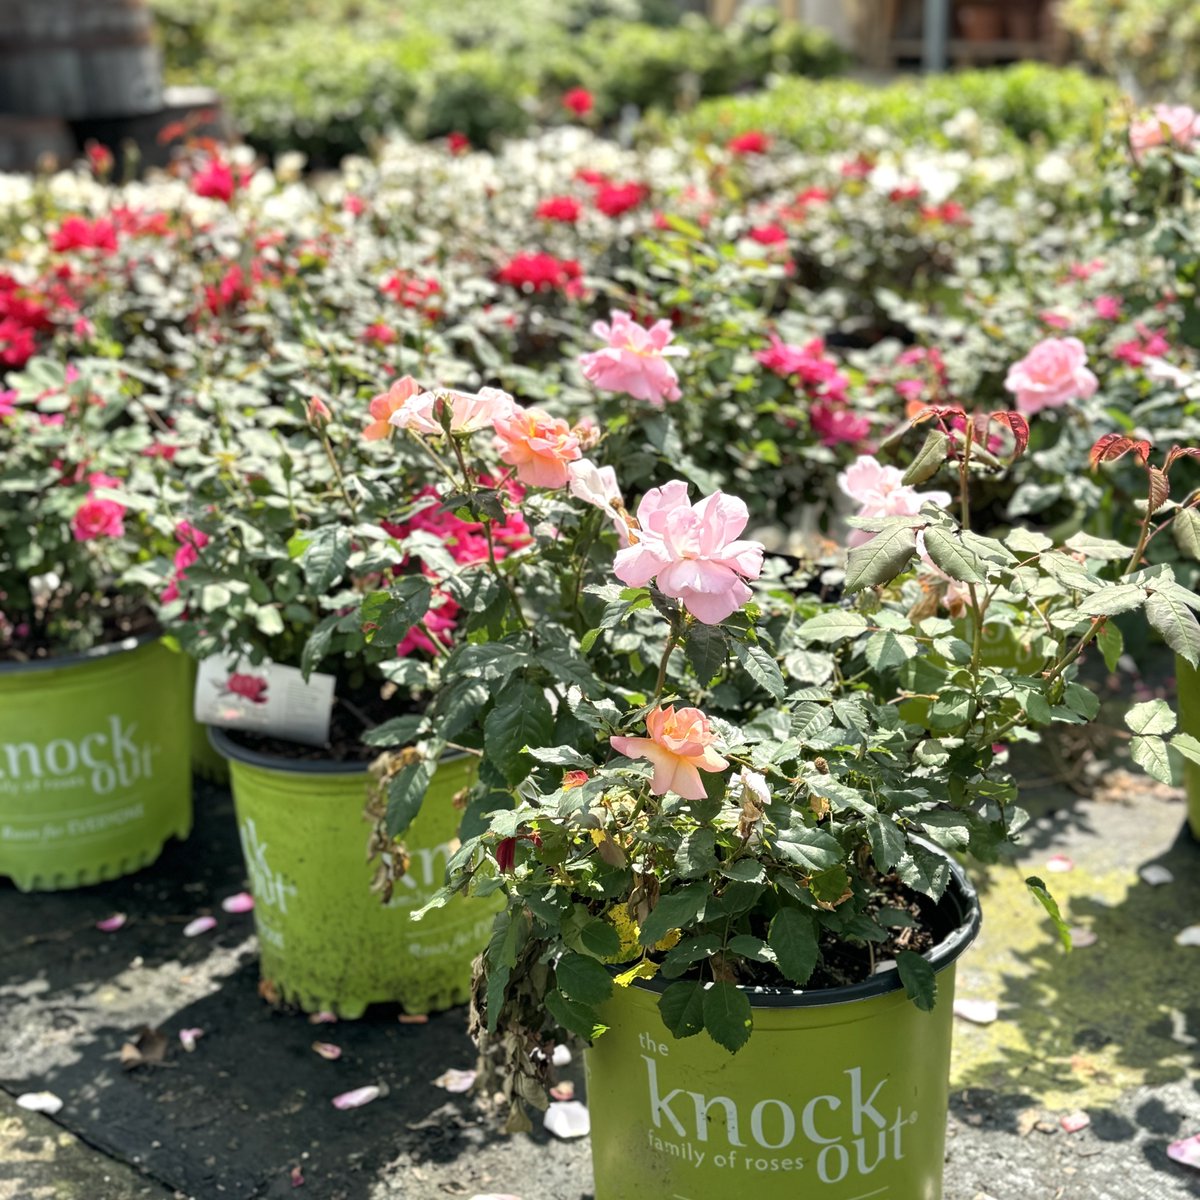 Our garden center is packed with beautiful shrubs and flowers of all varieties, including roses. We have old-fashion roses, knockouts, and drift roses. Let us take care of all of your gardening needs.

#AceOfGray #GardenCenter #SpringPlanting #Roses #ShopLocal...